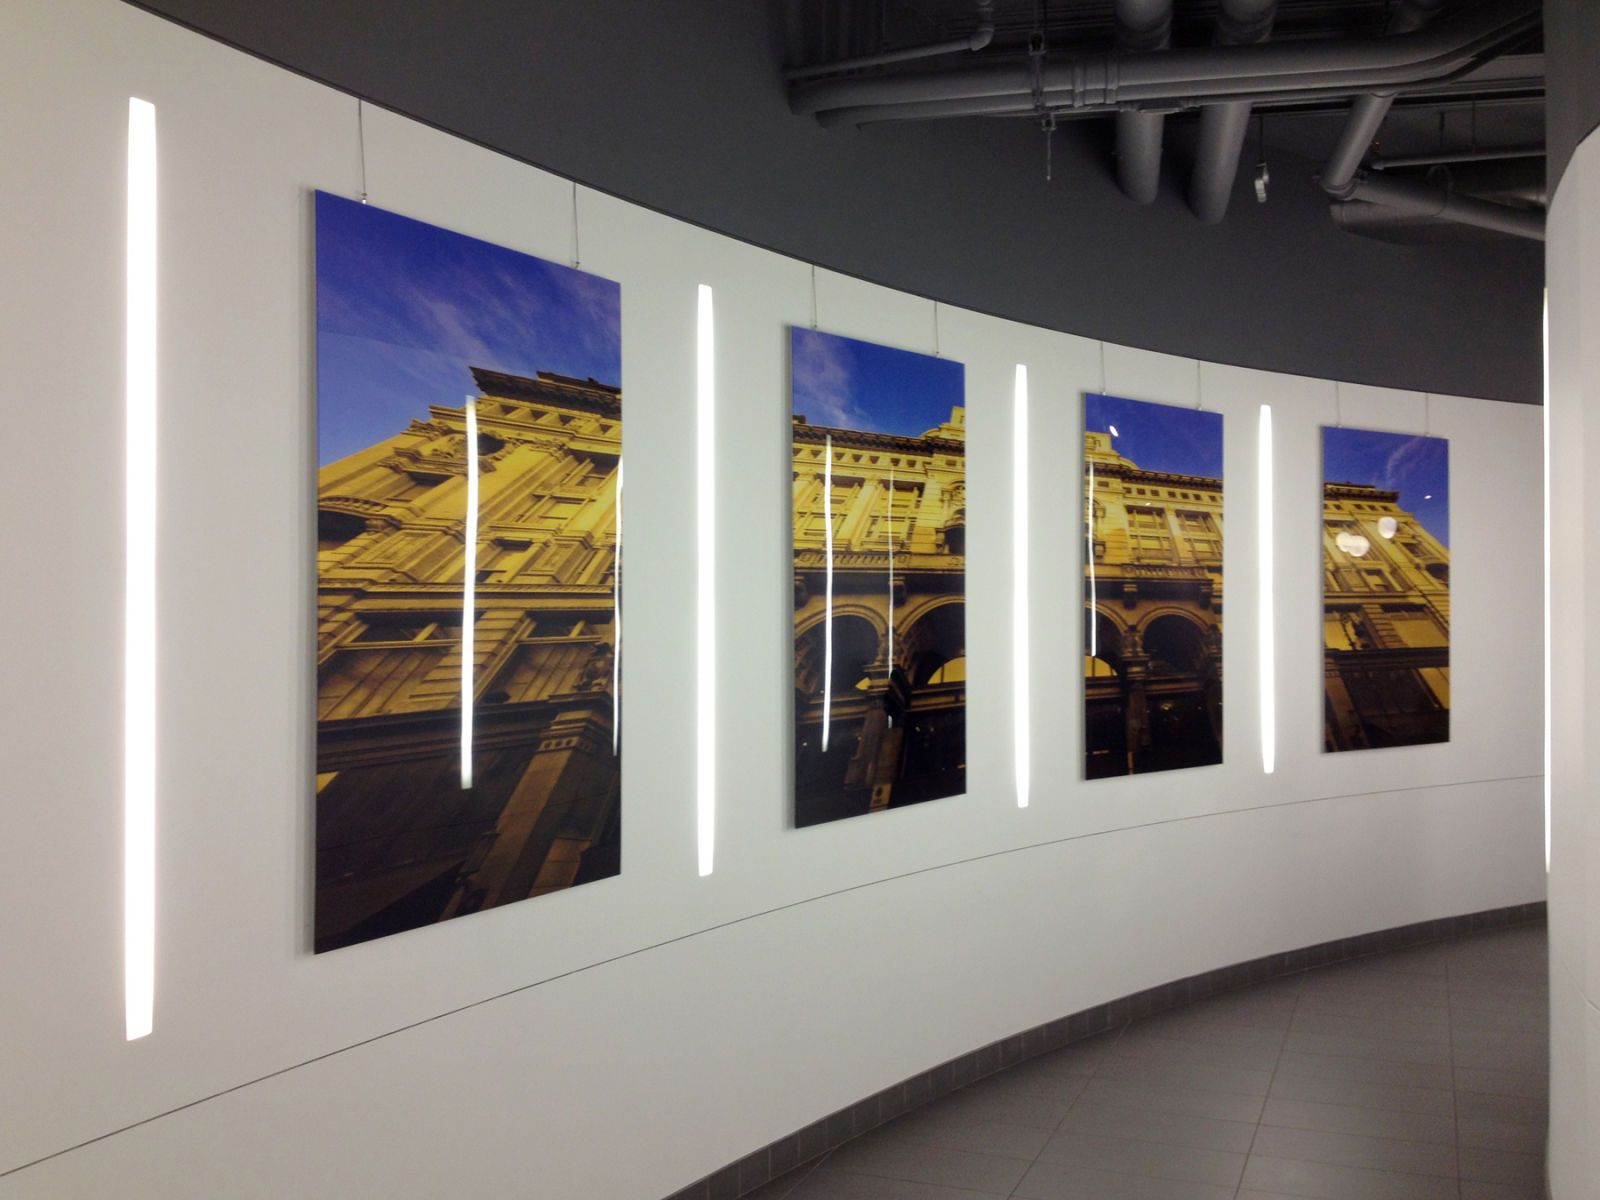 Photography Installation at 32BJ